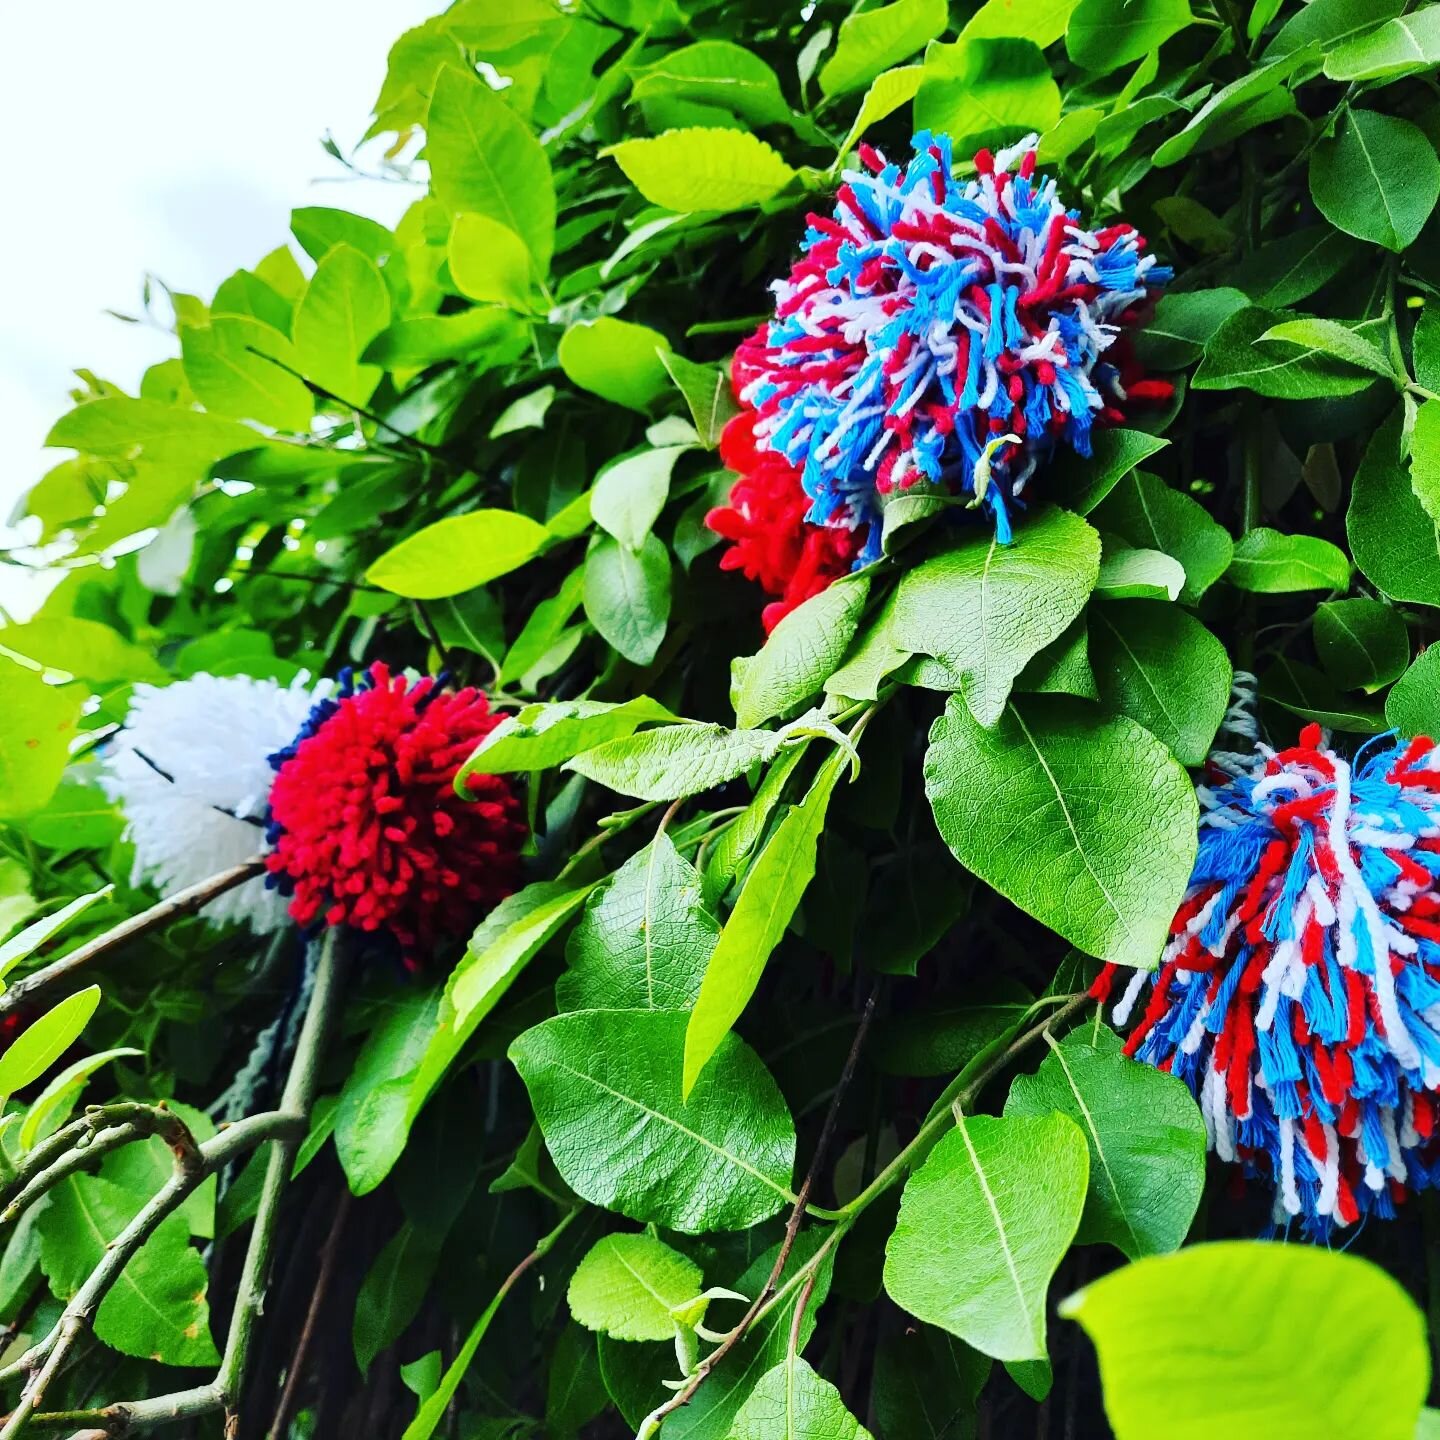 Jubilee pompoms!

#jubilee
#platinumjubilee 
#streetparty

Join us 10:30am this Saturday!